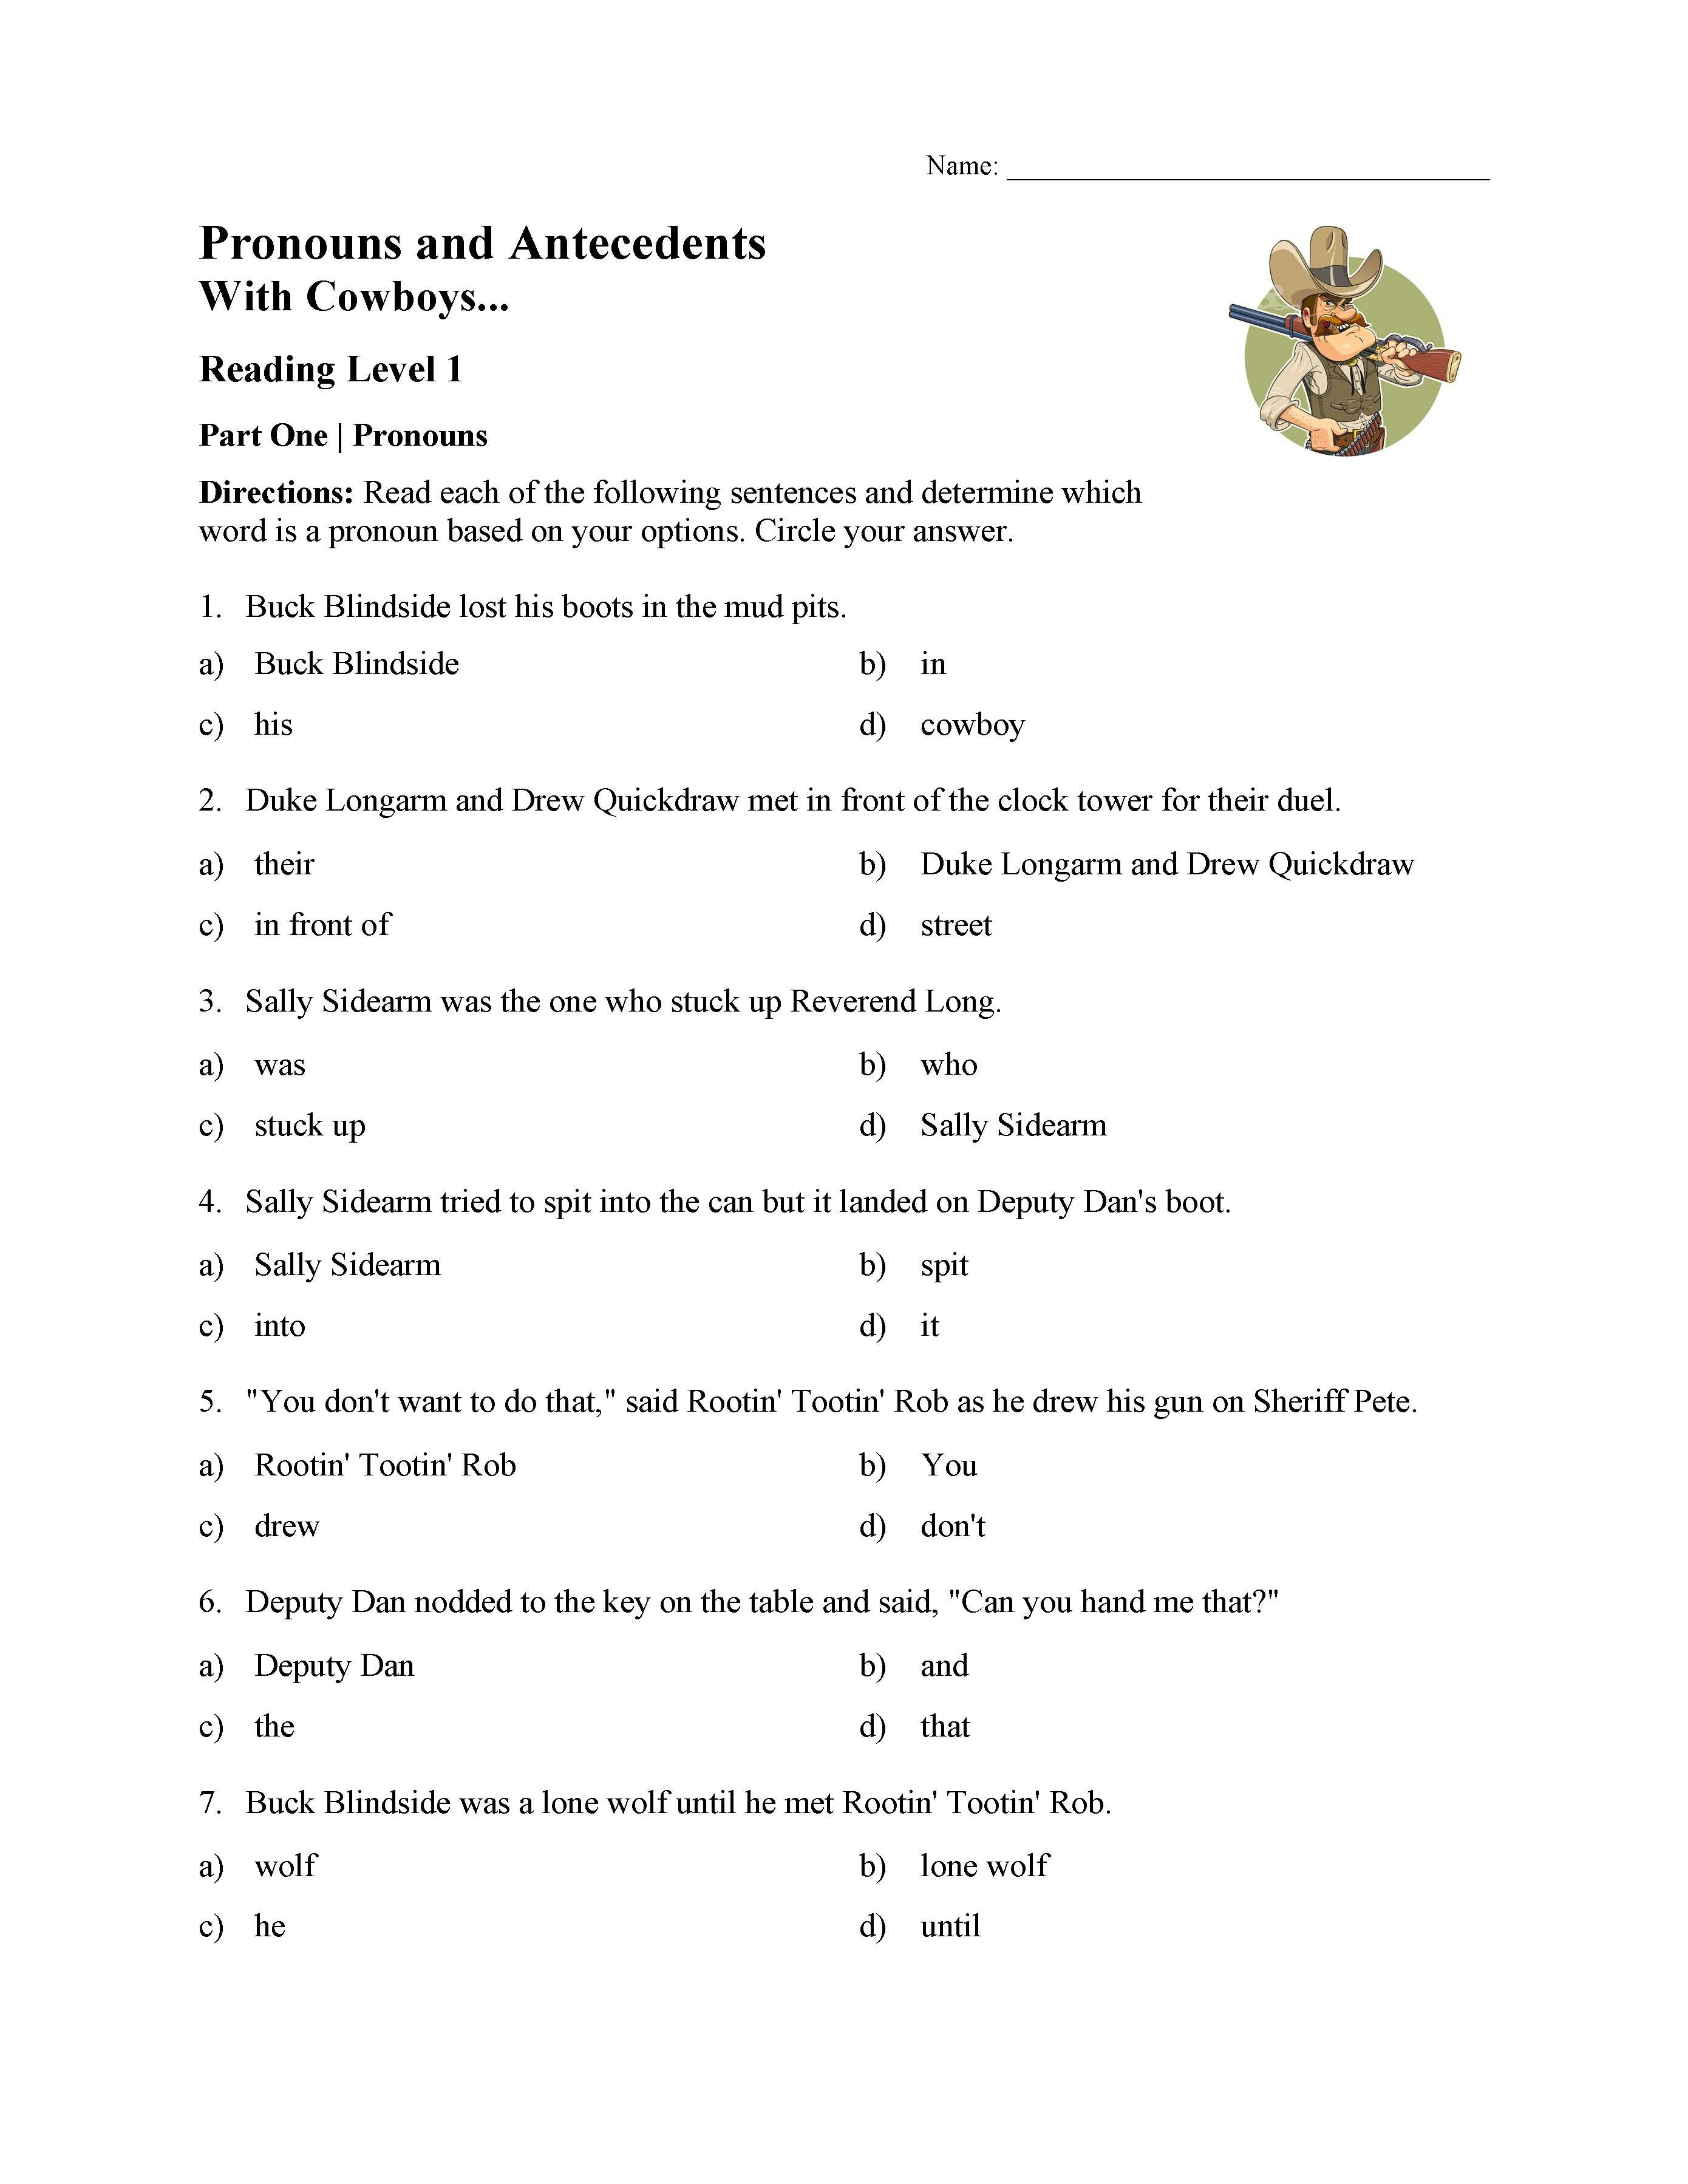 Pronouns Worksheets 5th Grade Pronoun and Antecedent Test with Cowboys